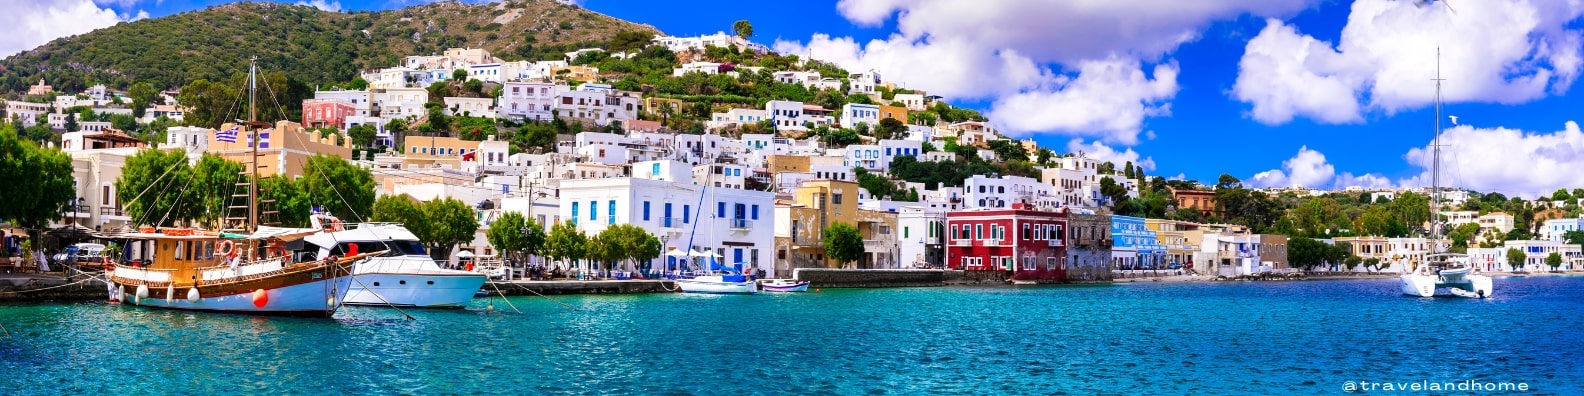 Agia Marina village on Leros Island in Greece travel and home panoramic min